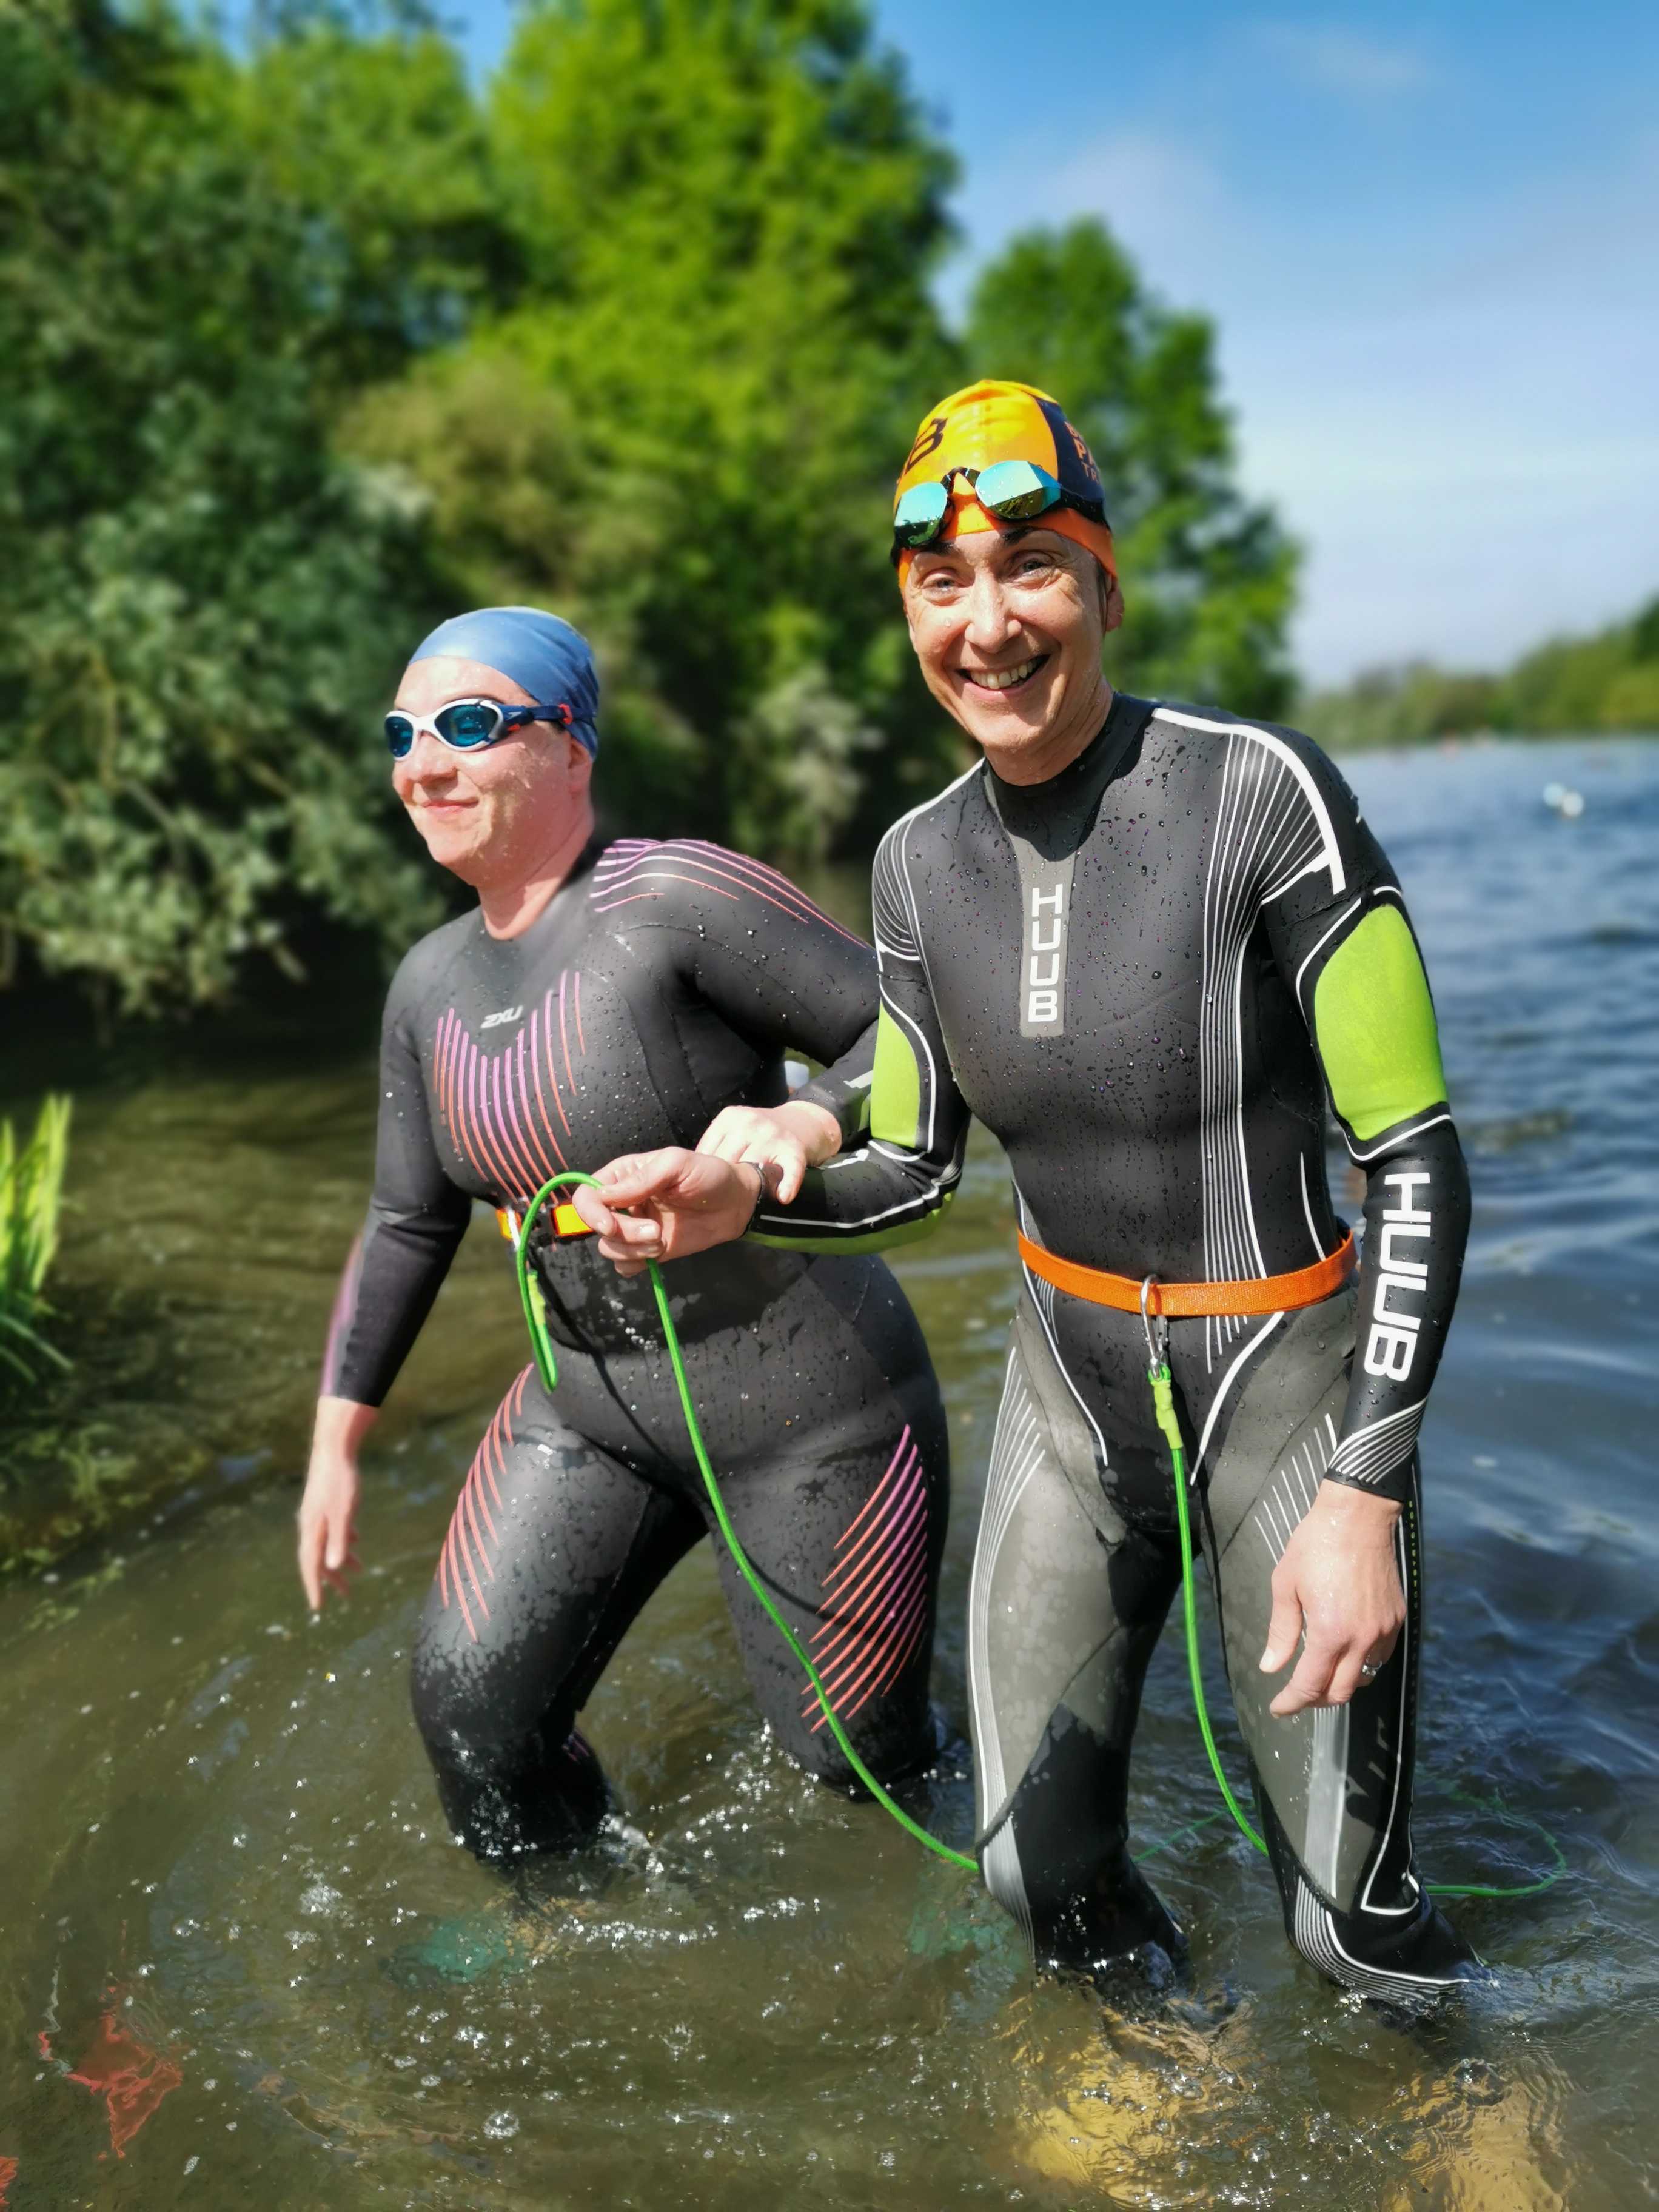 Tow women wearing wetsuits and swimming hats